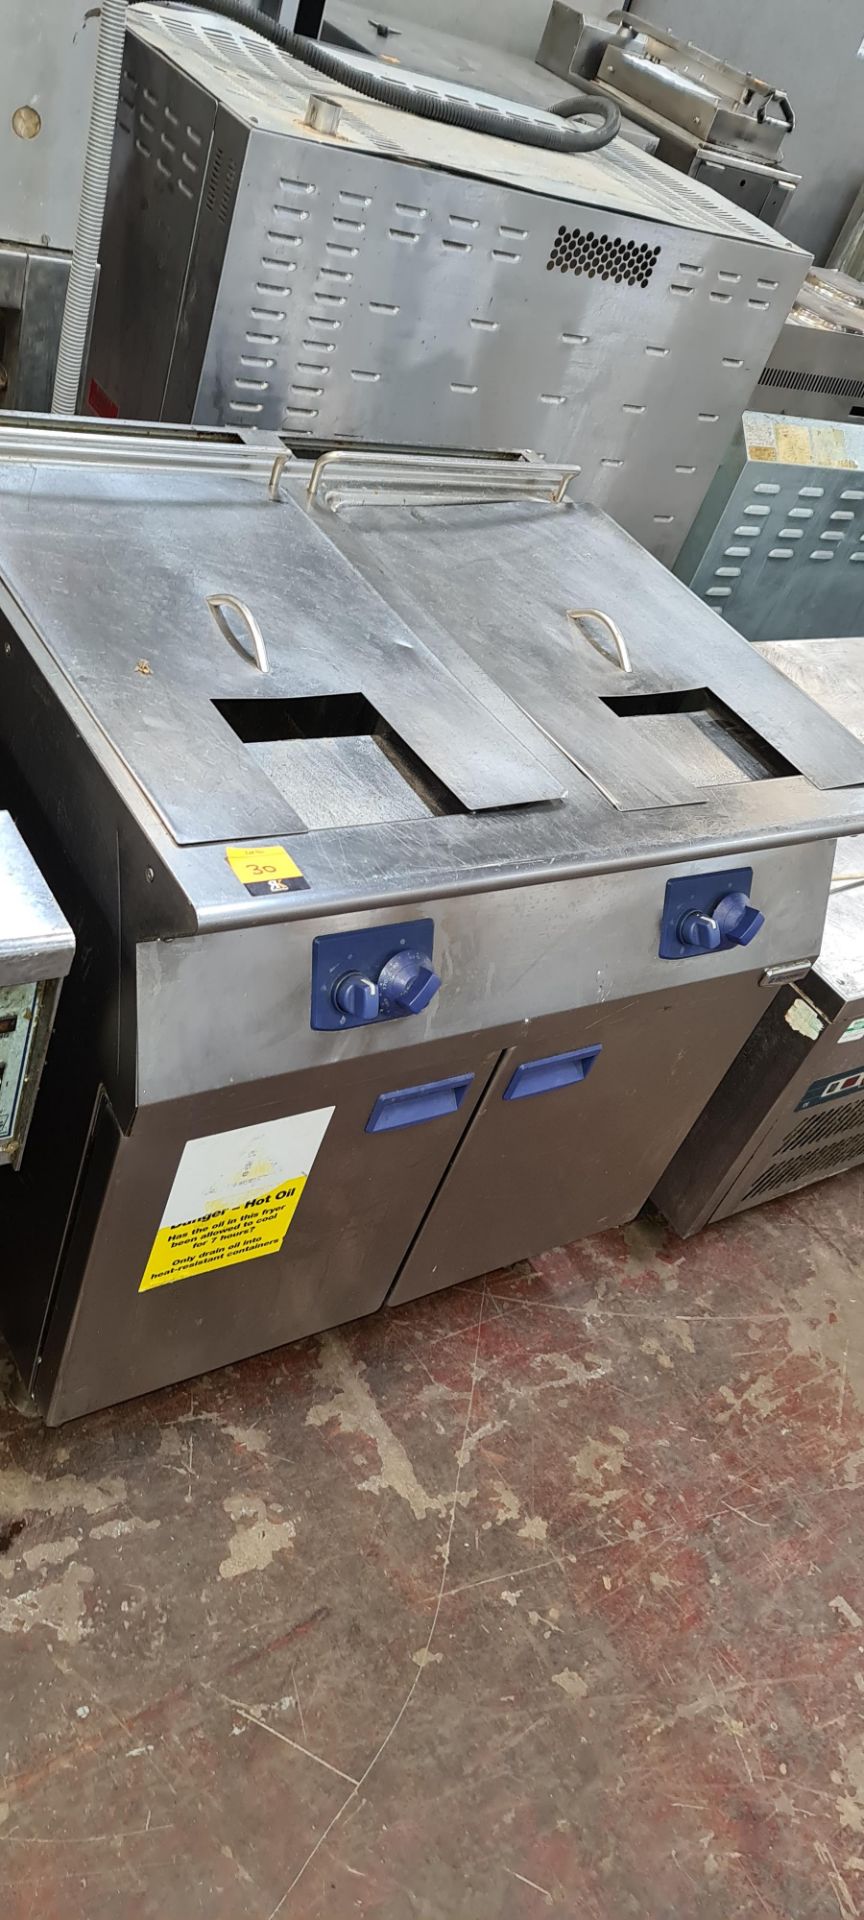 Electrolux stainless steel twin well deep fat fryer system model QFRG800